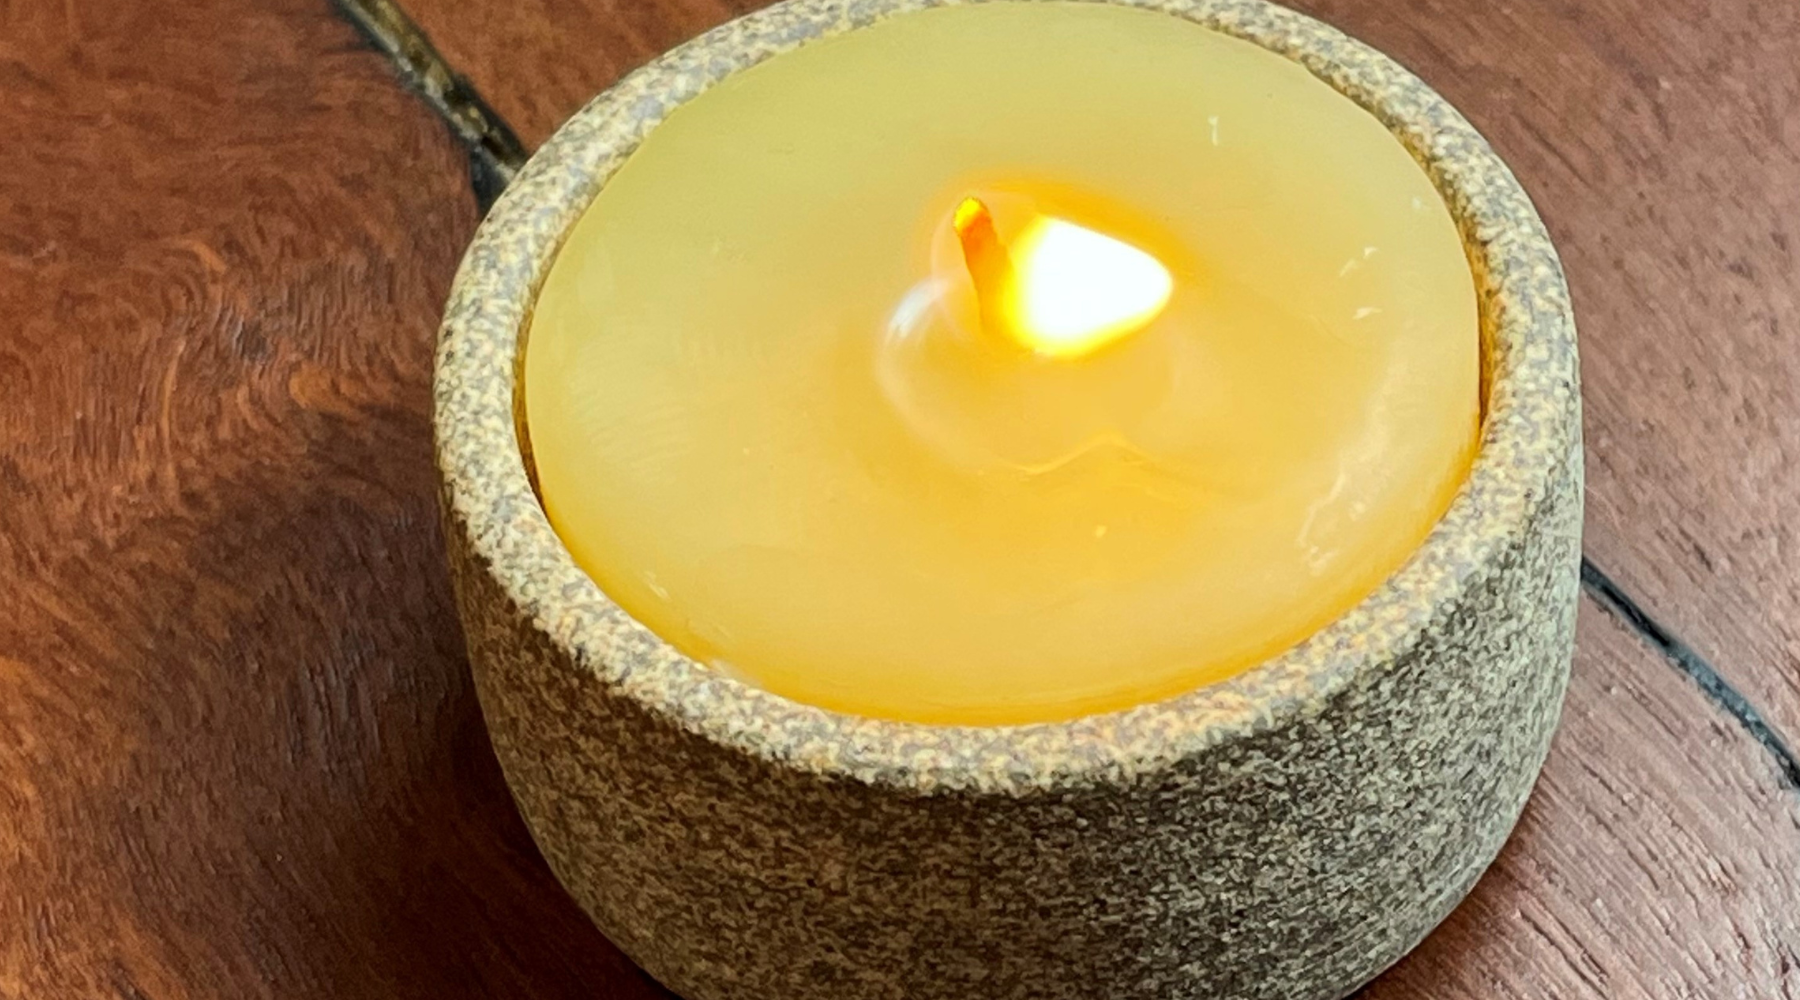 How To Make Homemade Beeswax Candles - Stay at Home Sarah